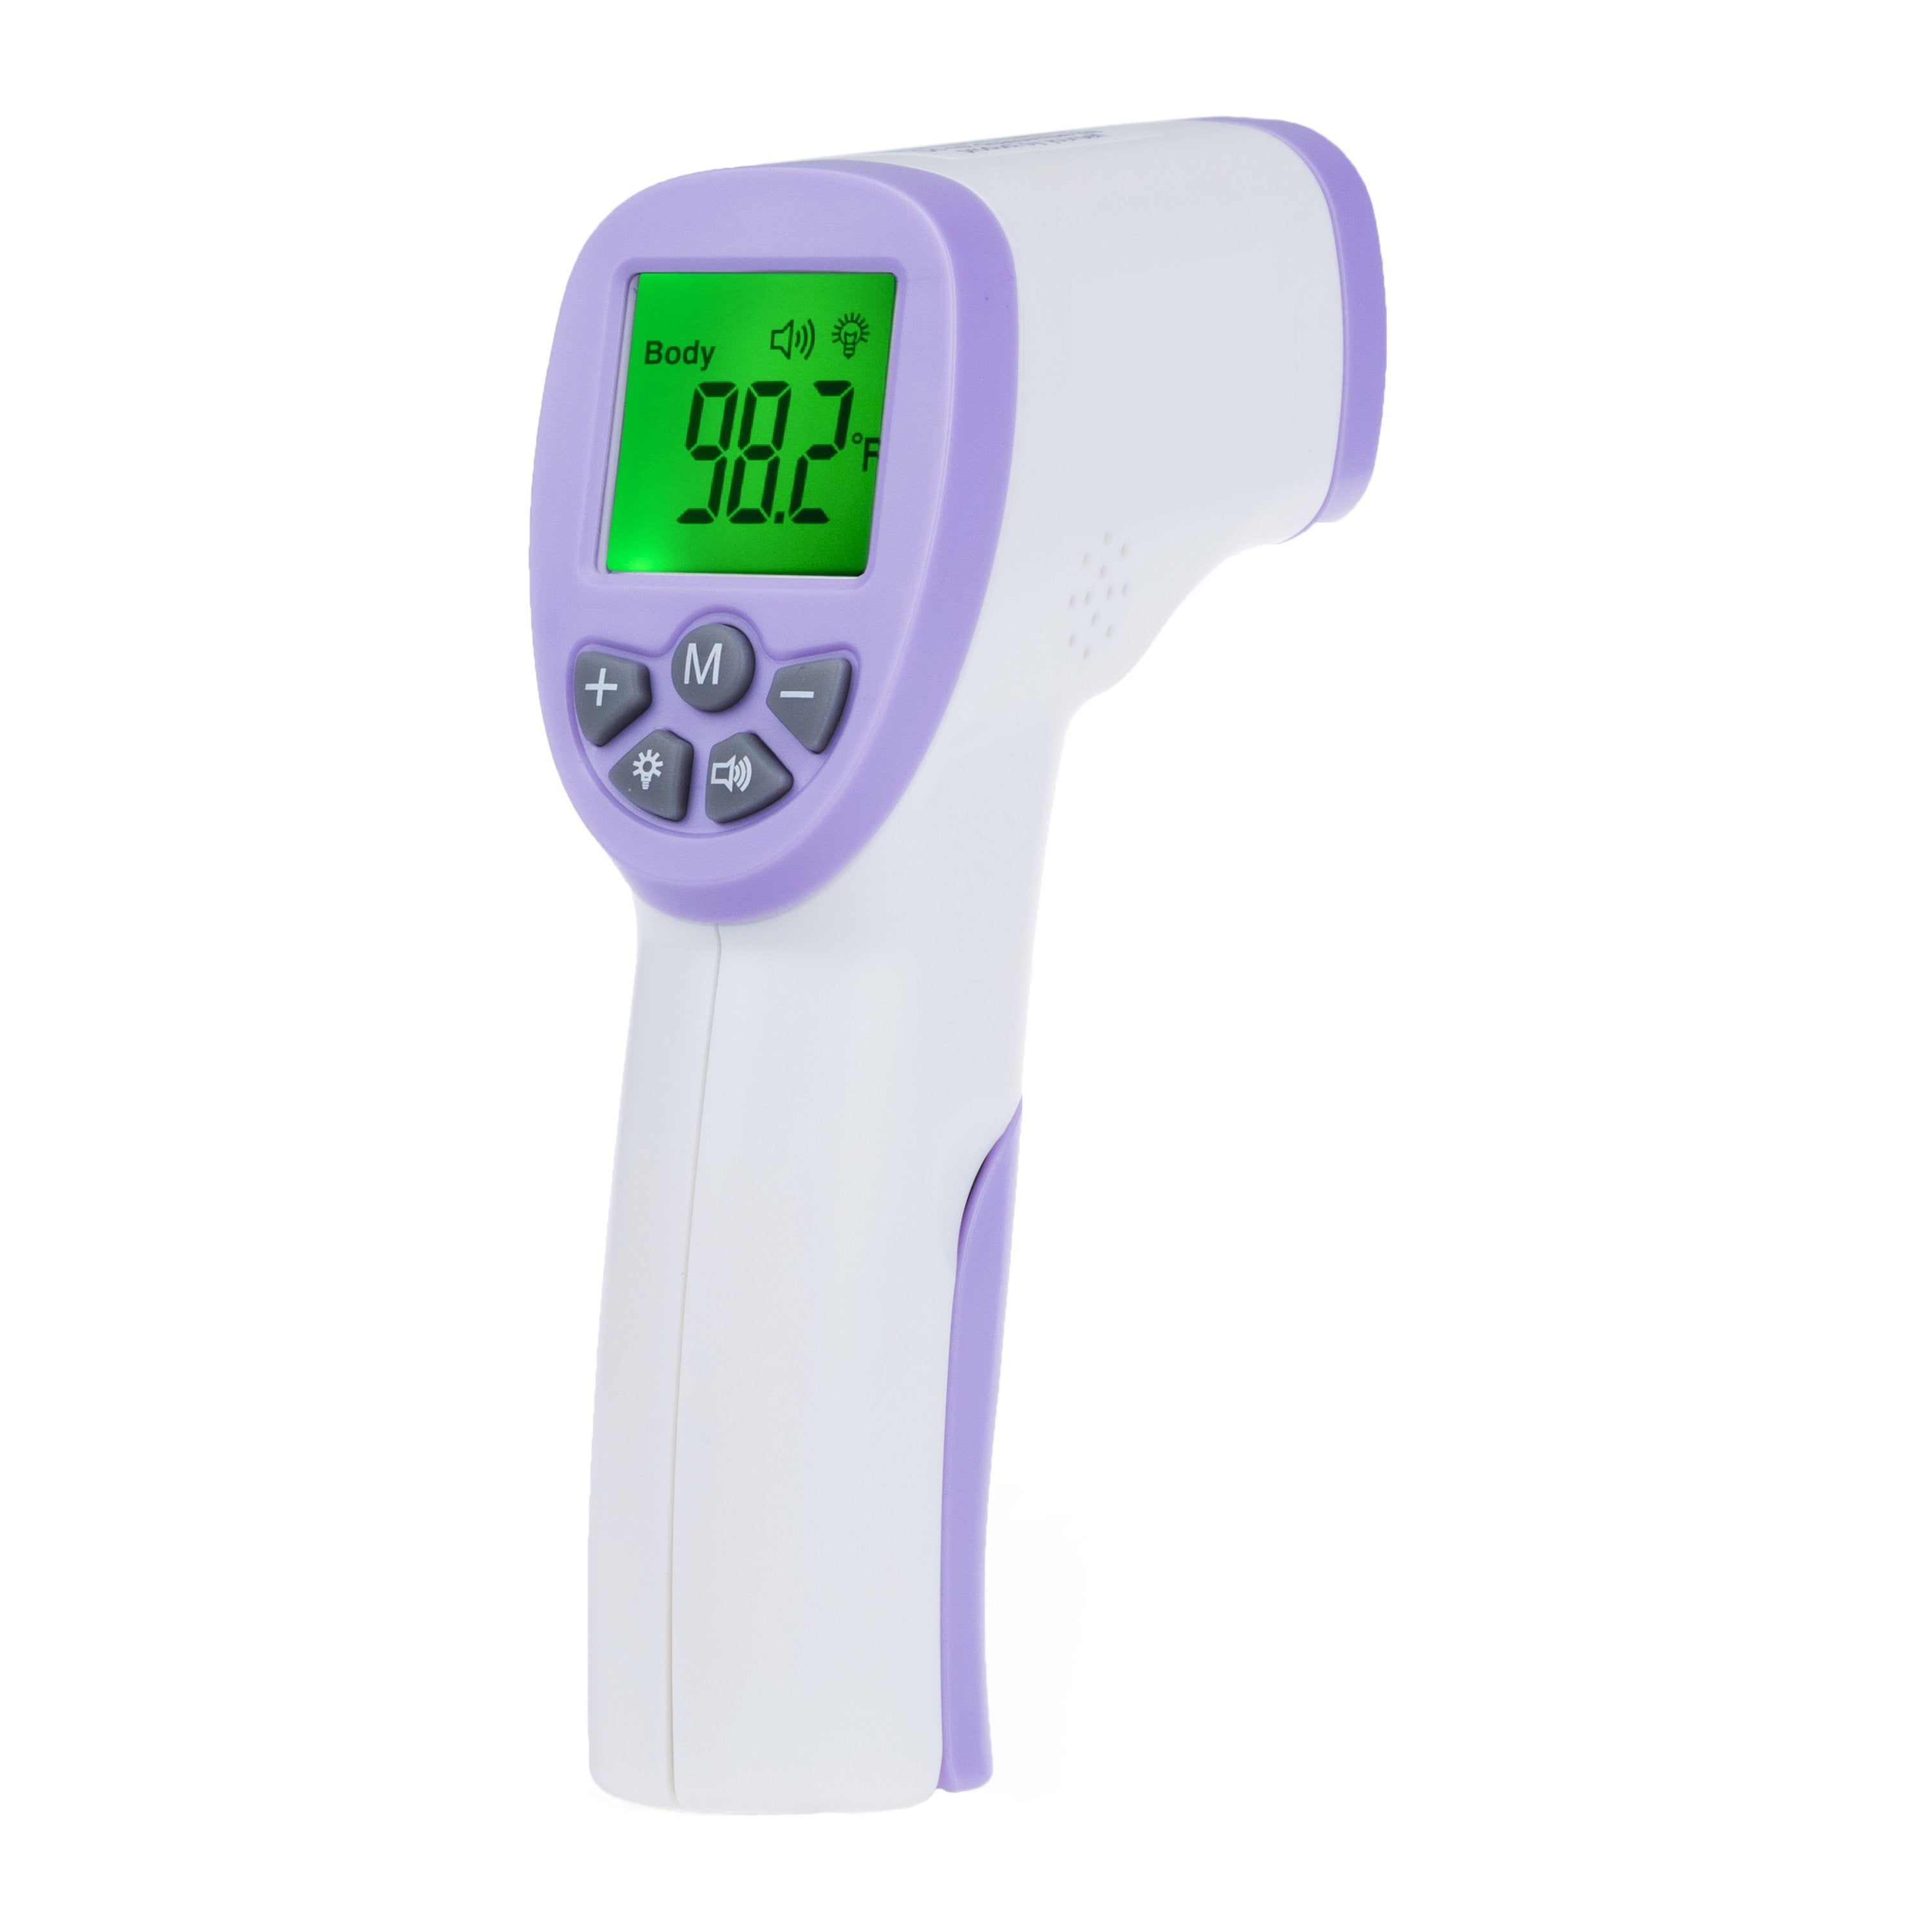 Dropship No Touch Non-Contact Forehead Digital Thermometer SLIM Home  Medical Level to Sell Online at a Lower Price